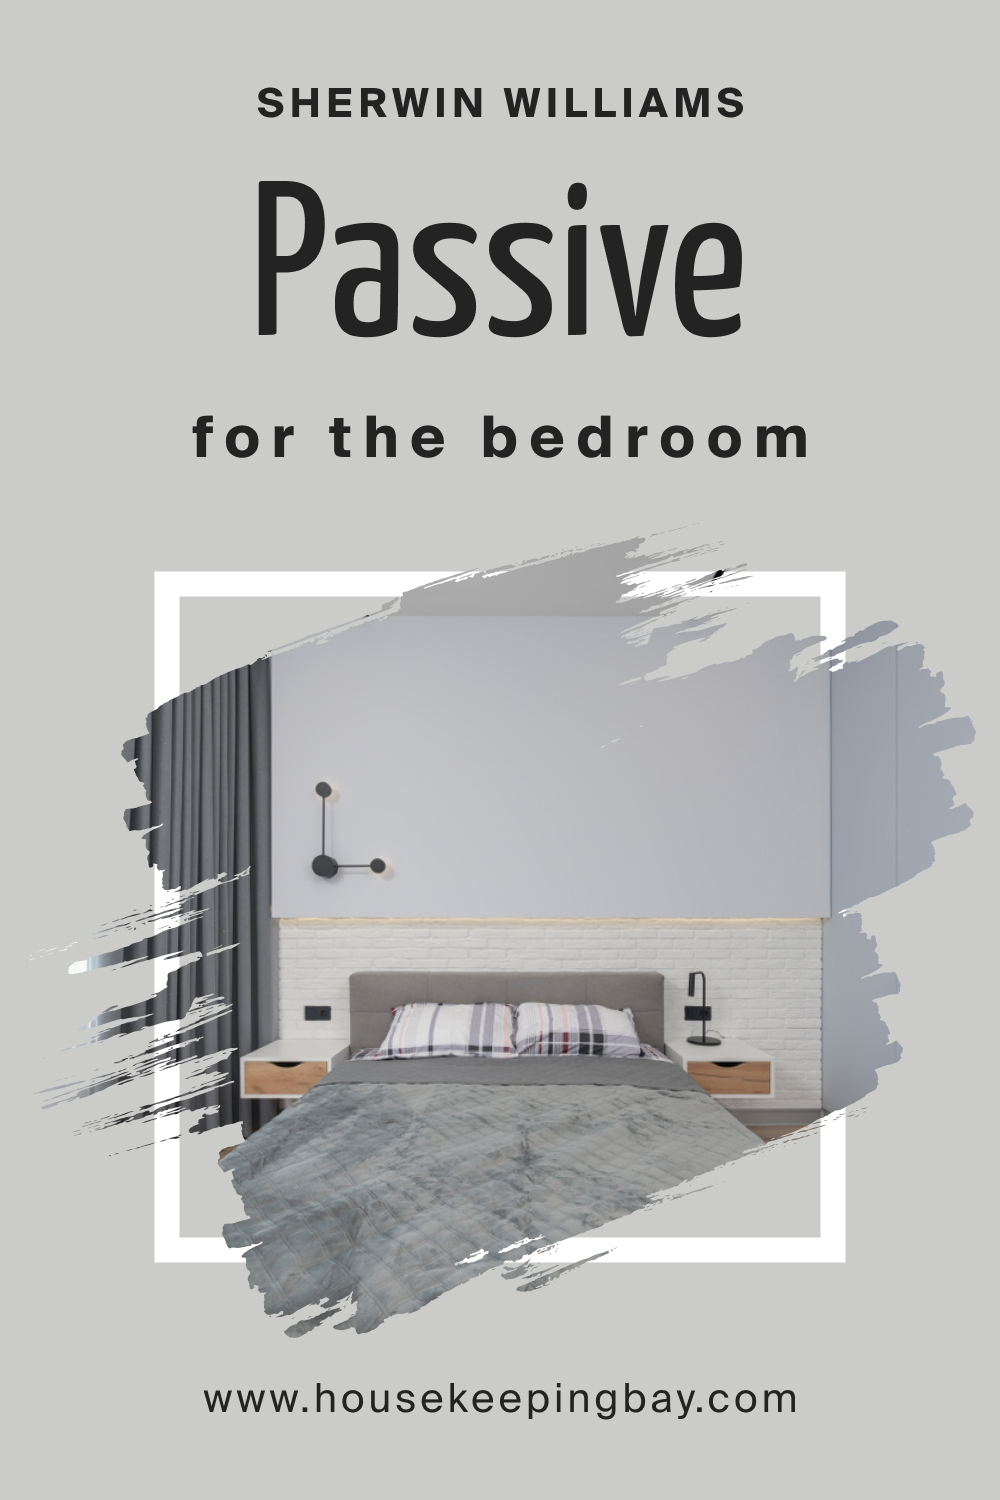 Sherwin Williams. SW Passive For the bedroom